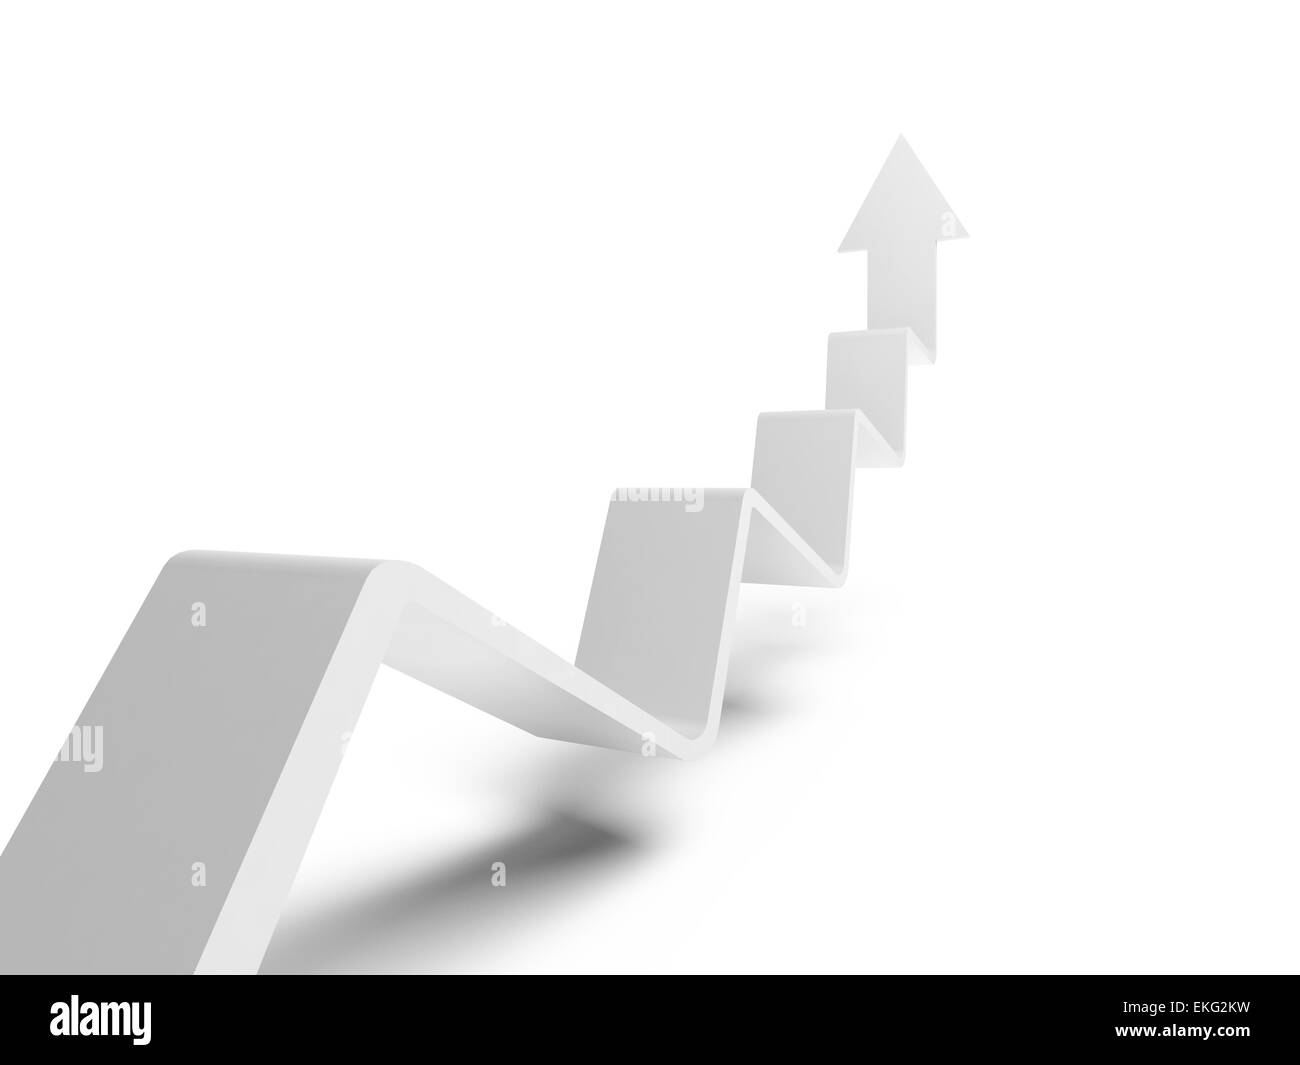 Broken trend line with arrow on end going up, 3d illustration isolated on white background Stock Photo